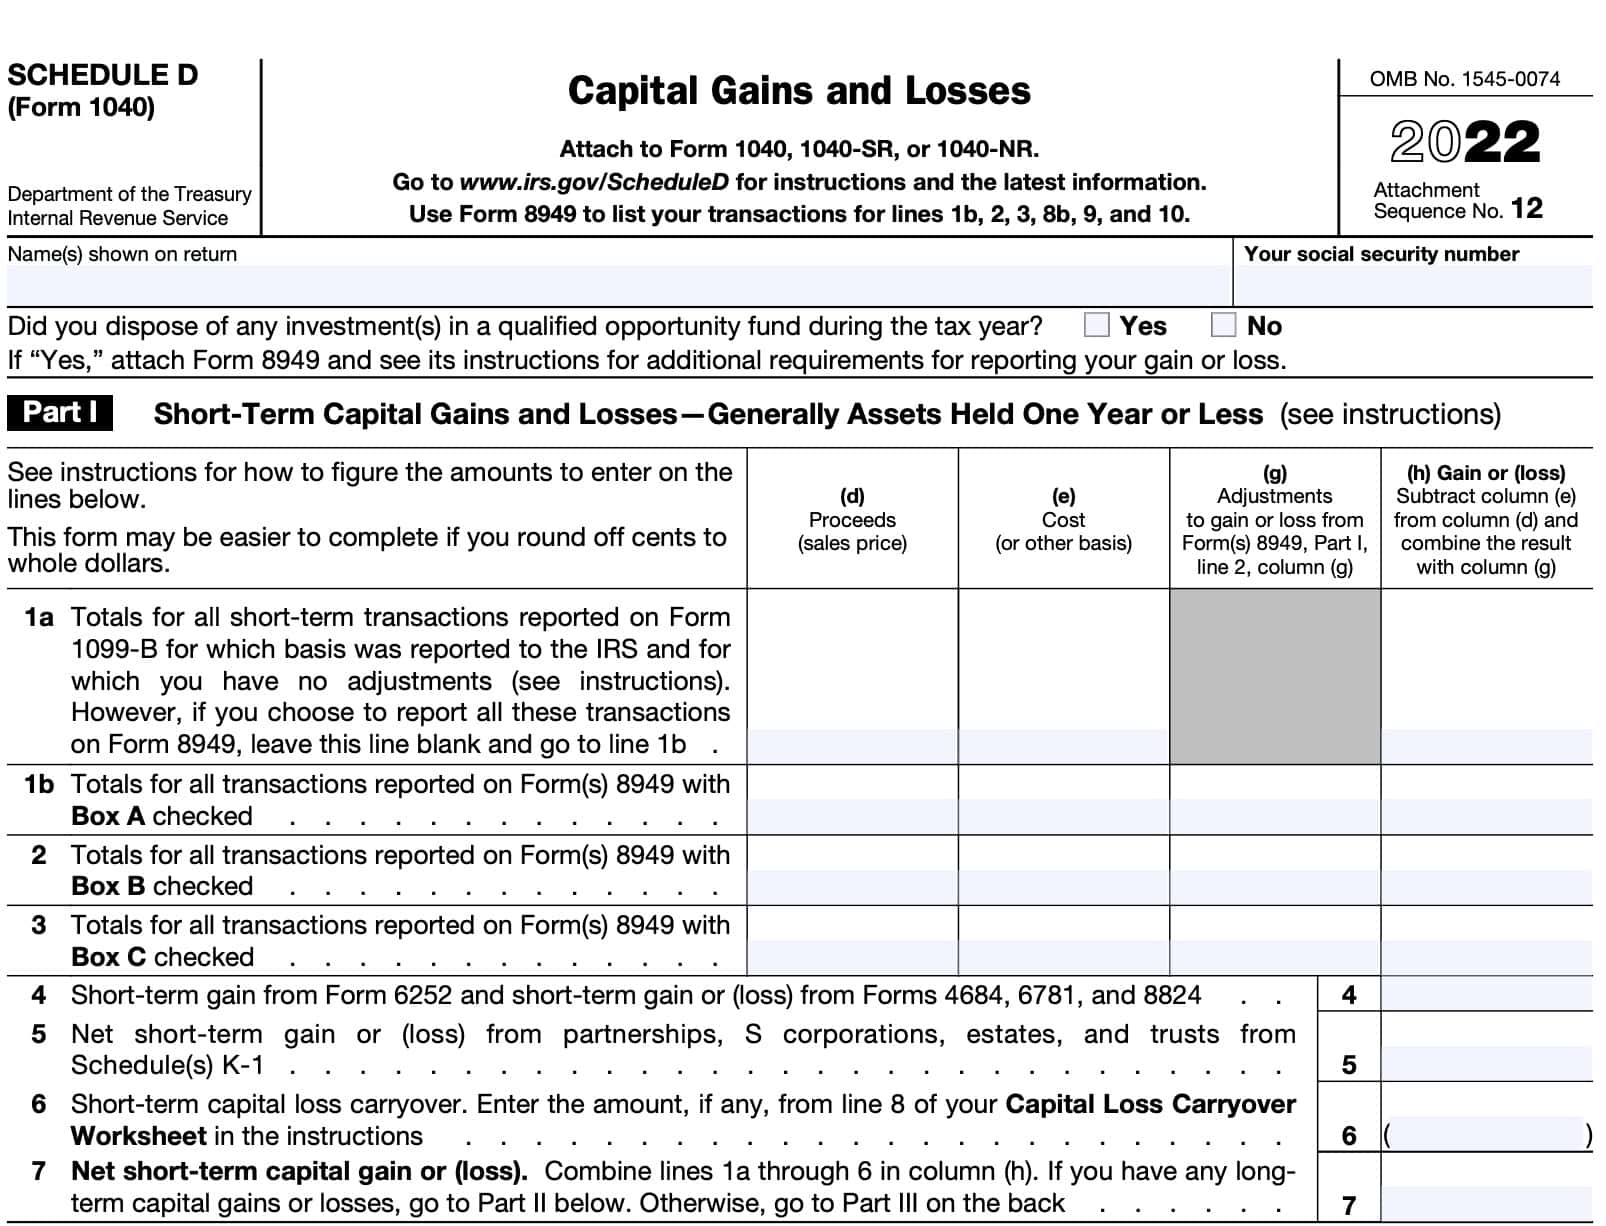 IRS Schedule D, Part I: Short-term capital gains and losses